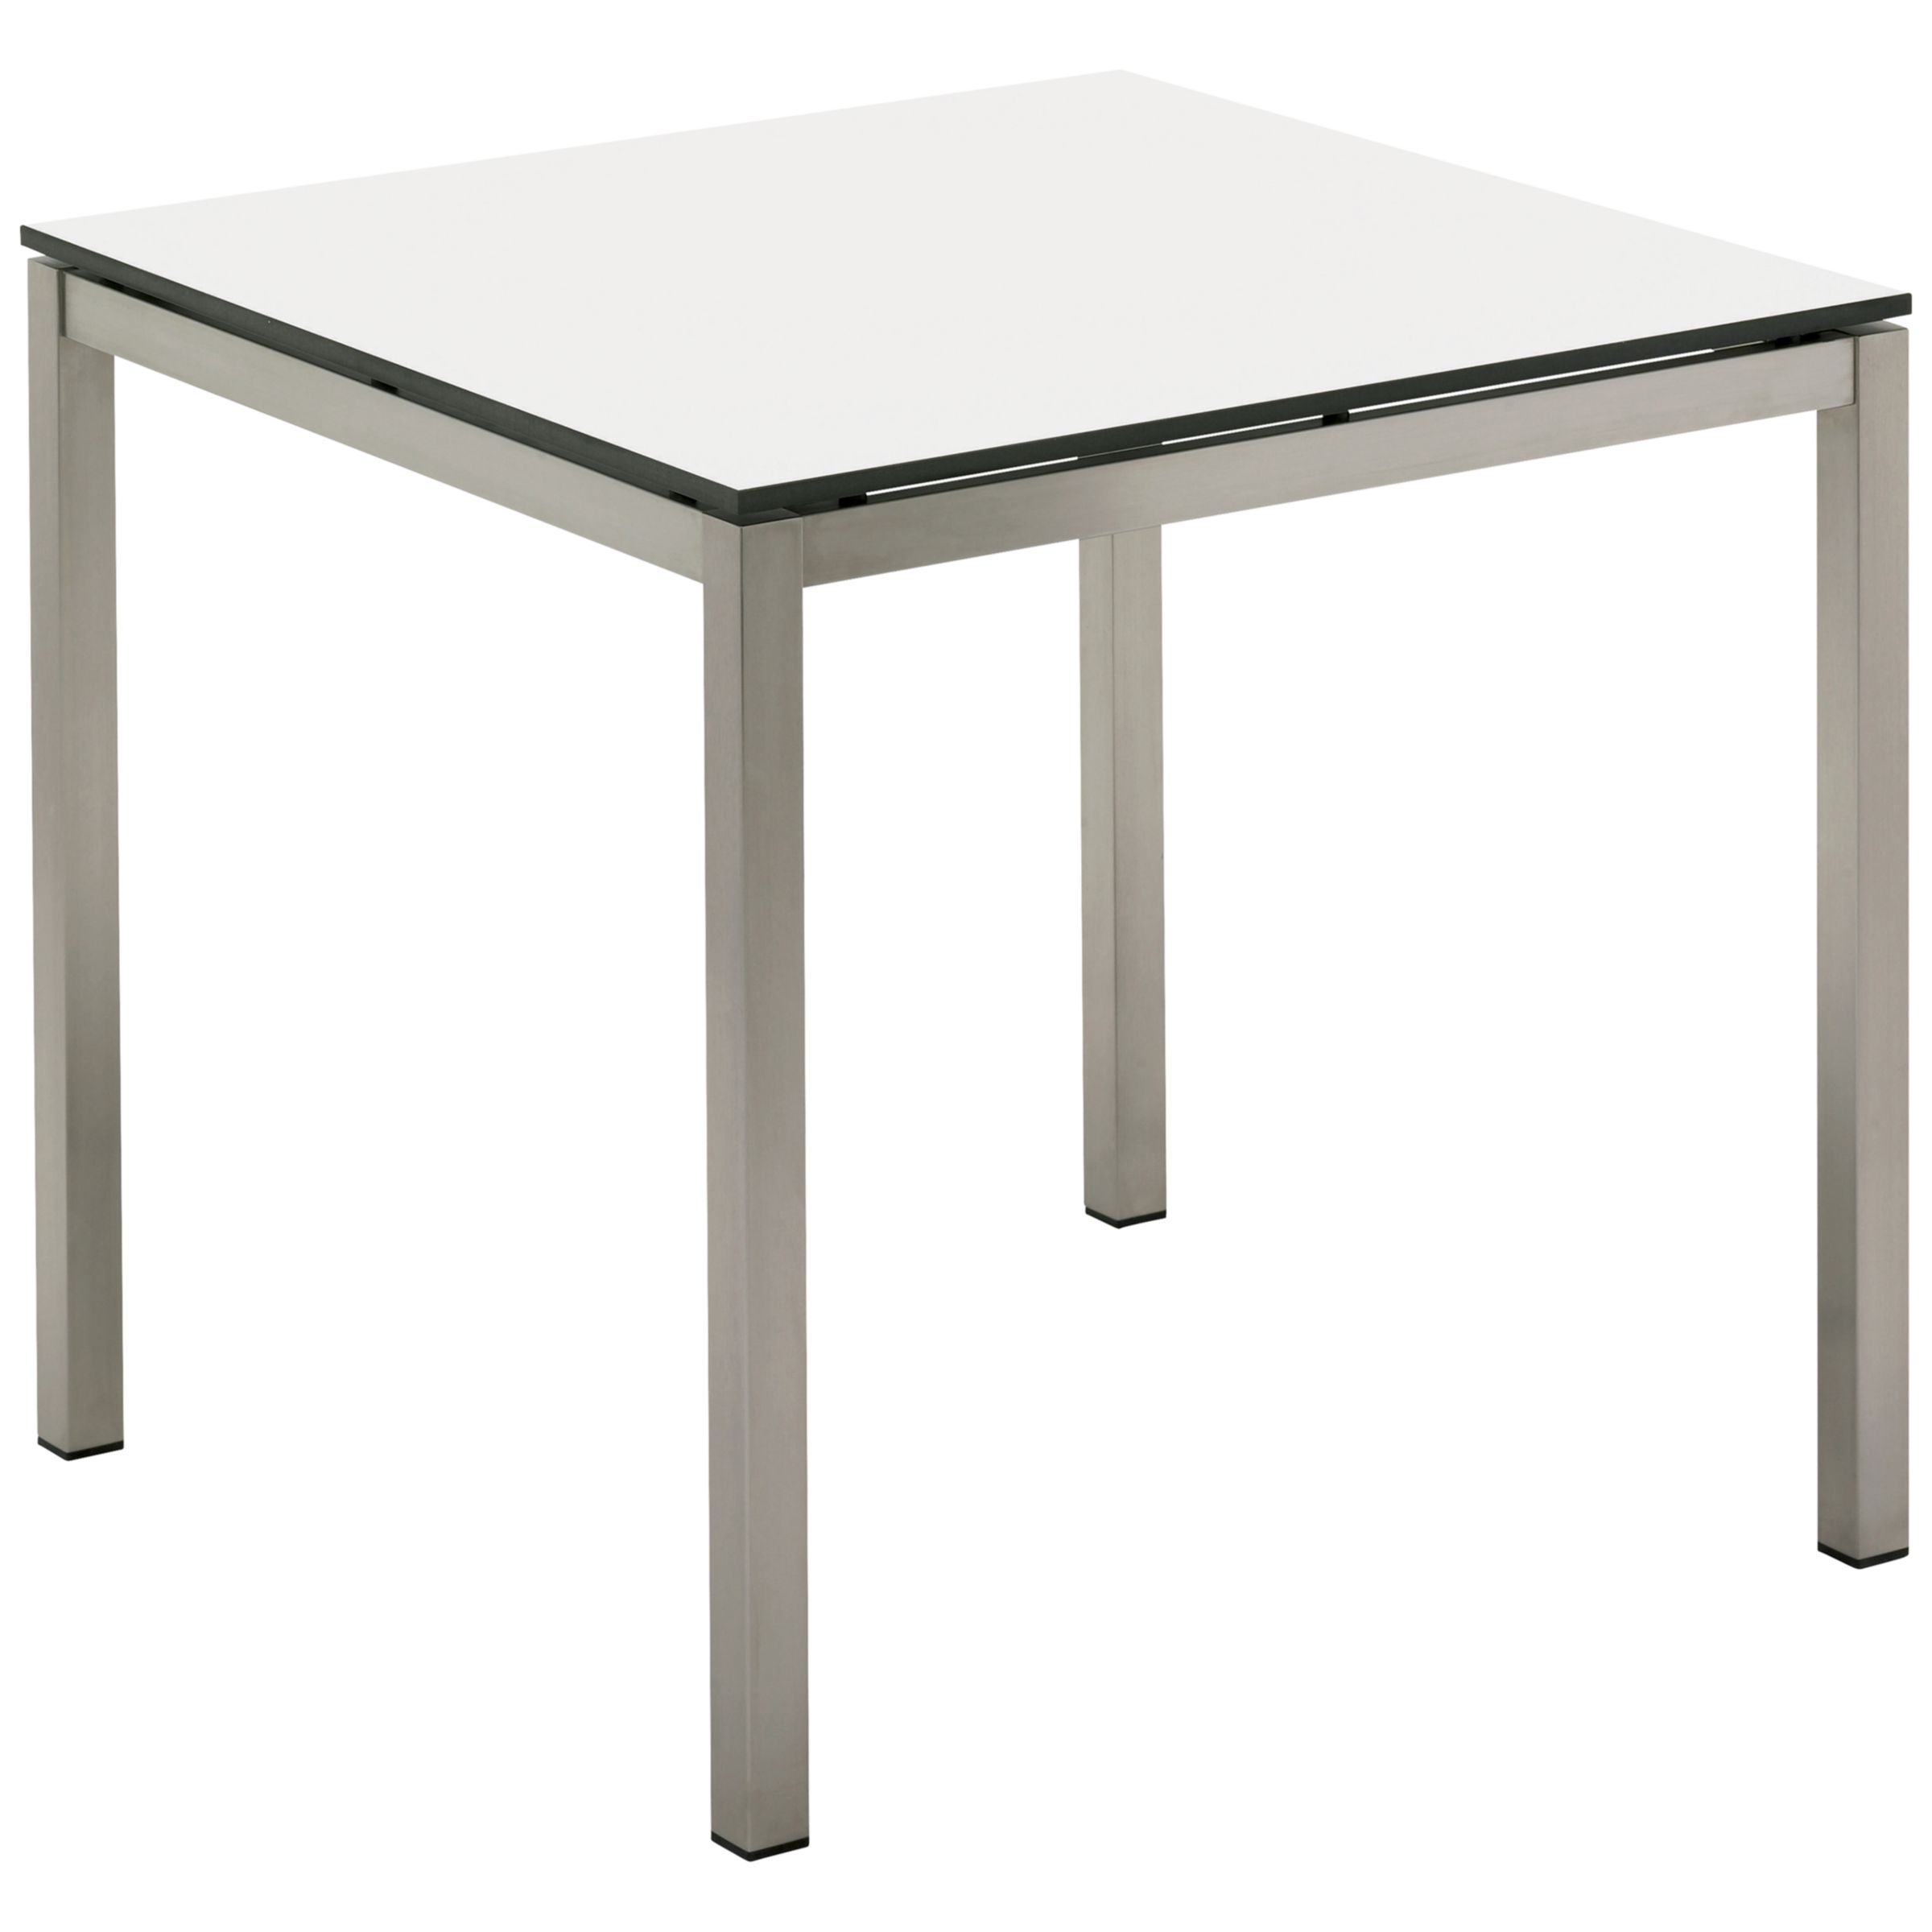 Gloster Kore Square 4 Seater Outdoor Dining Table, White HPL, width 80cm